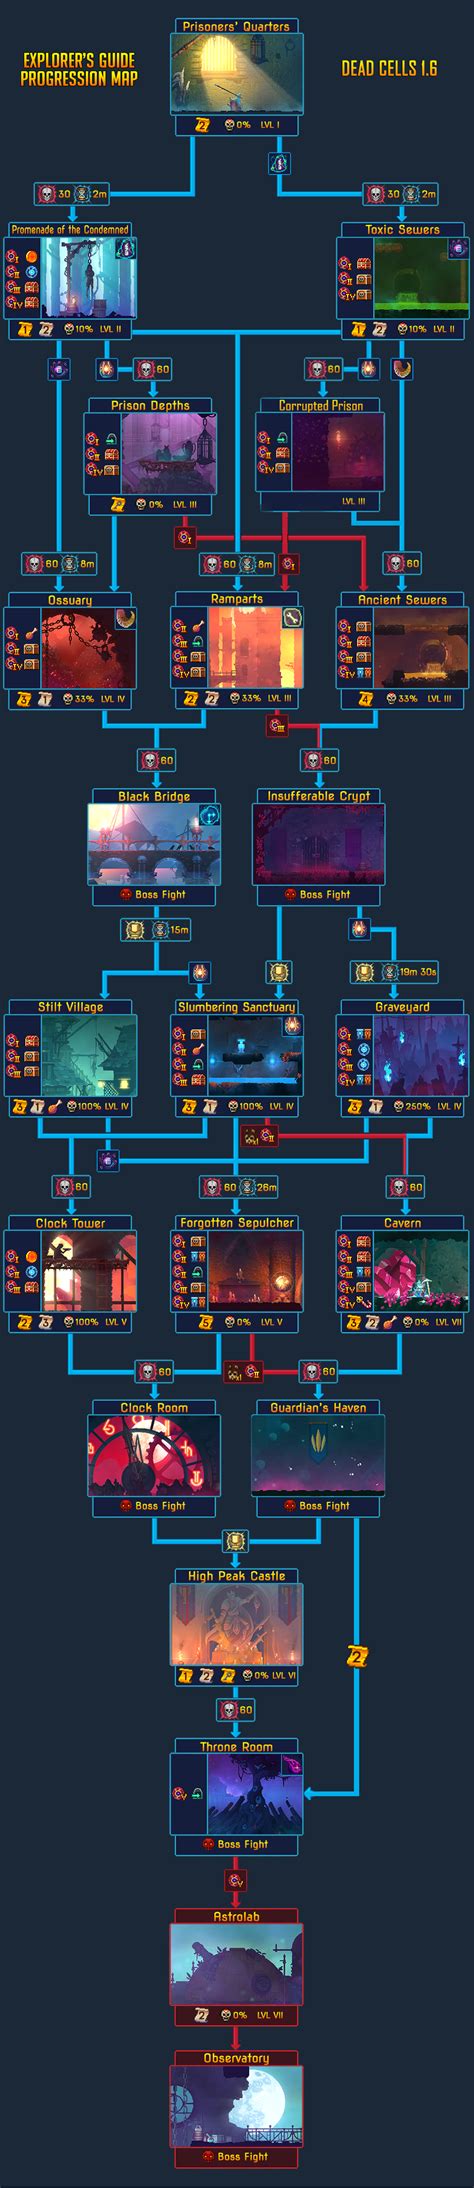 Templatemap Official Dead Cells Wiki Cell Games Map Attack On